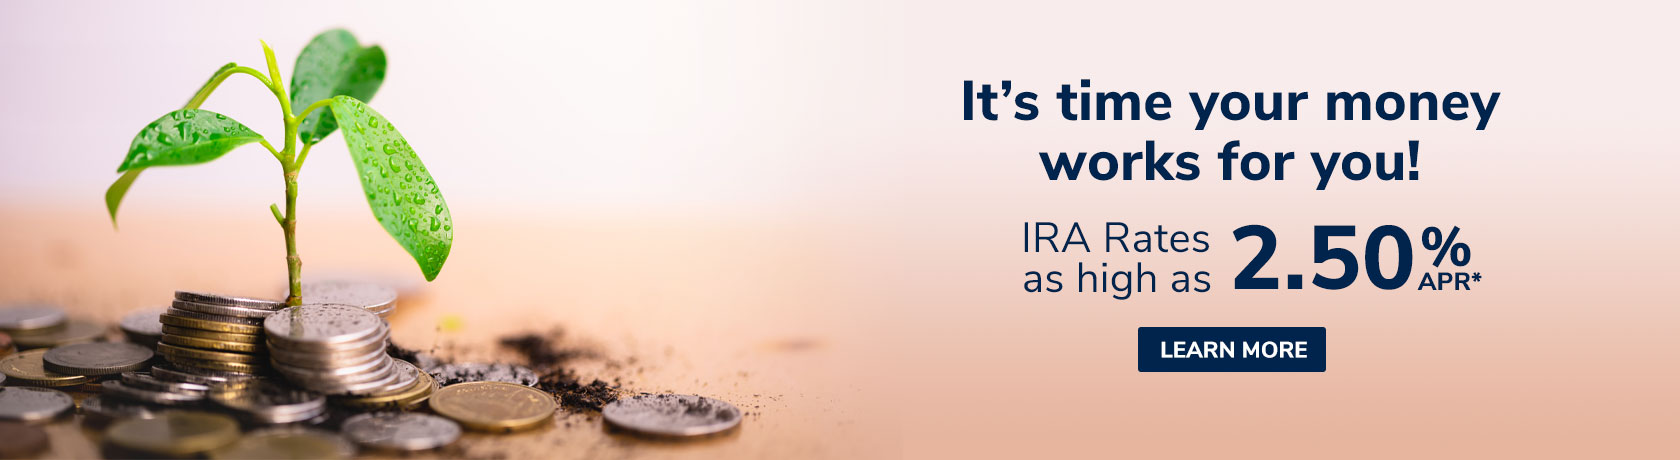 It’s time your money works for you! IRA Rates as high as 2.50% APR* Learn More